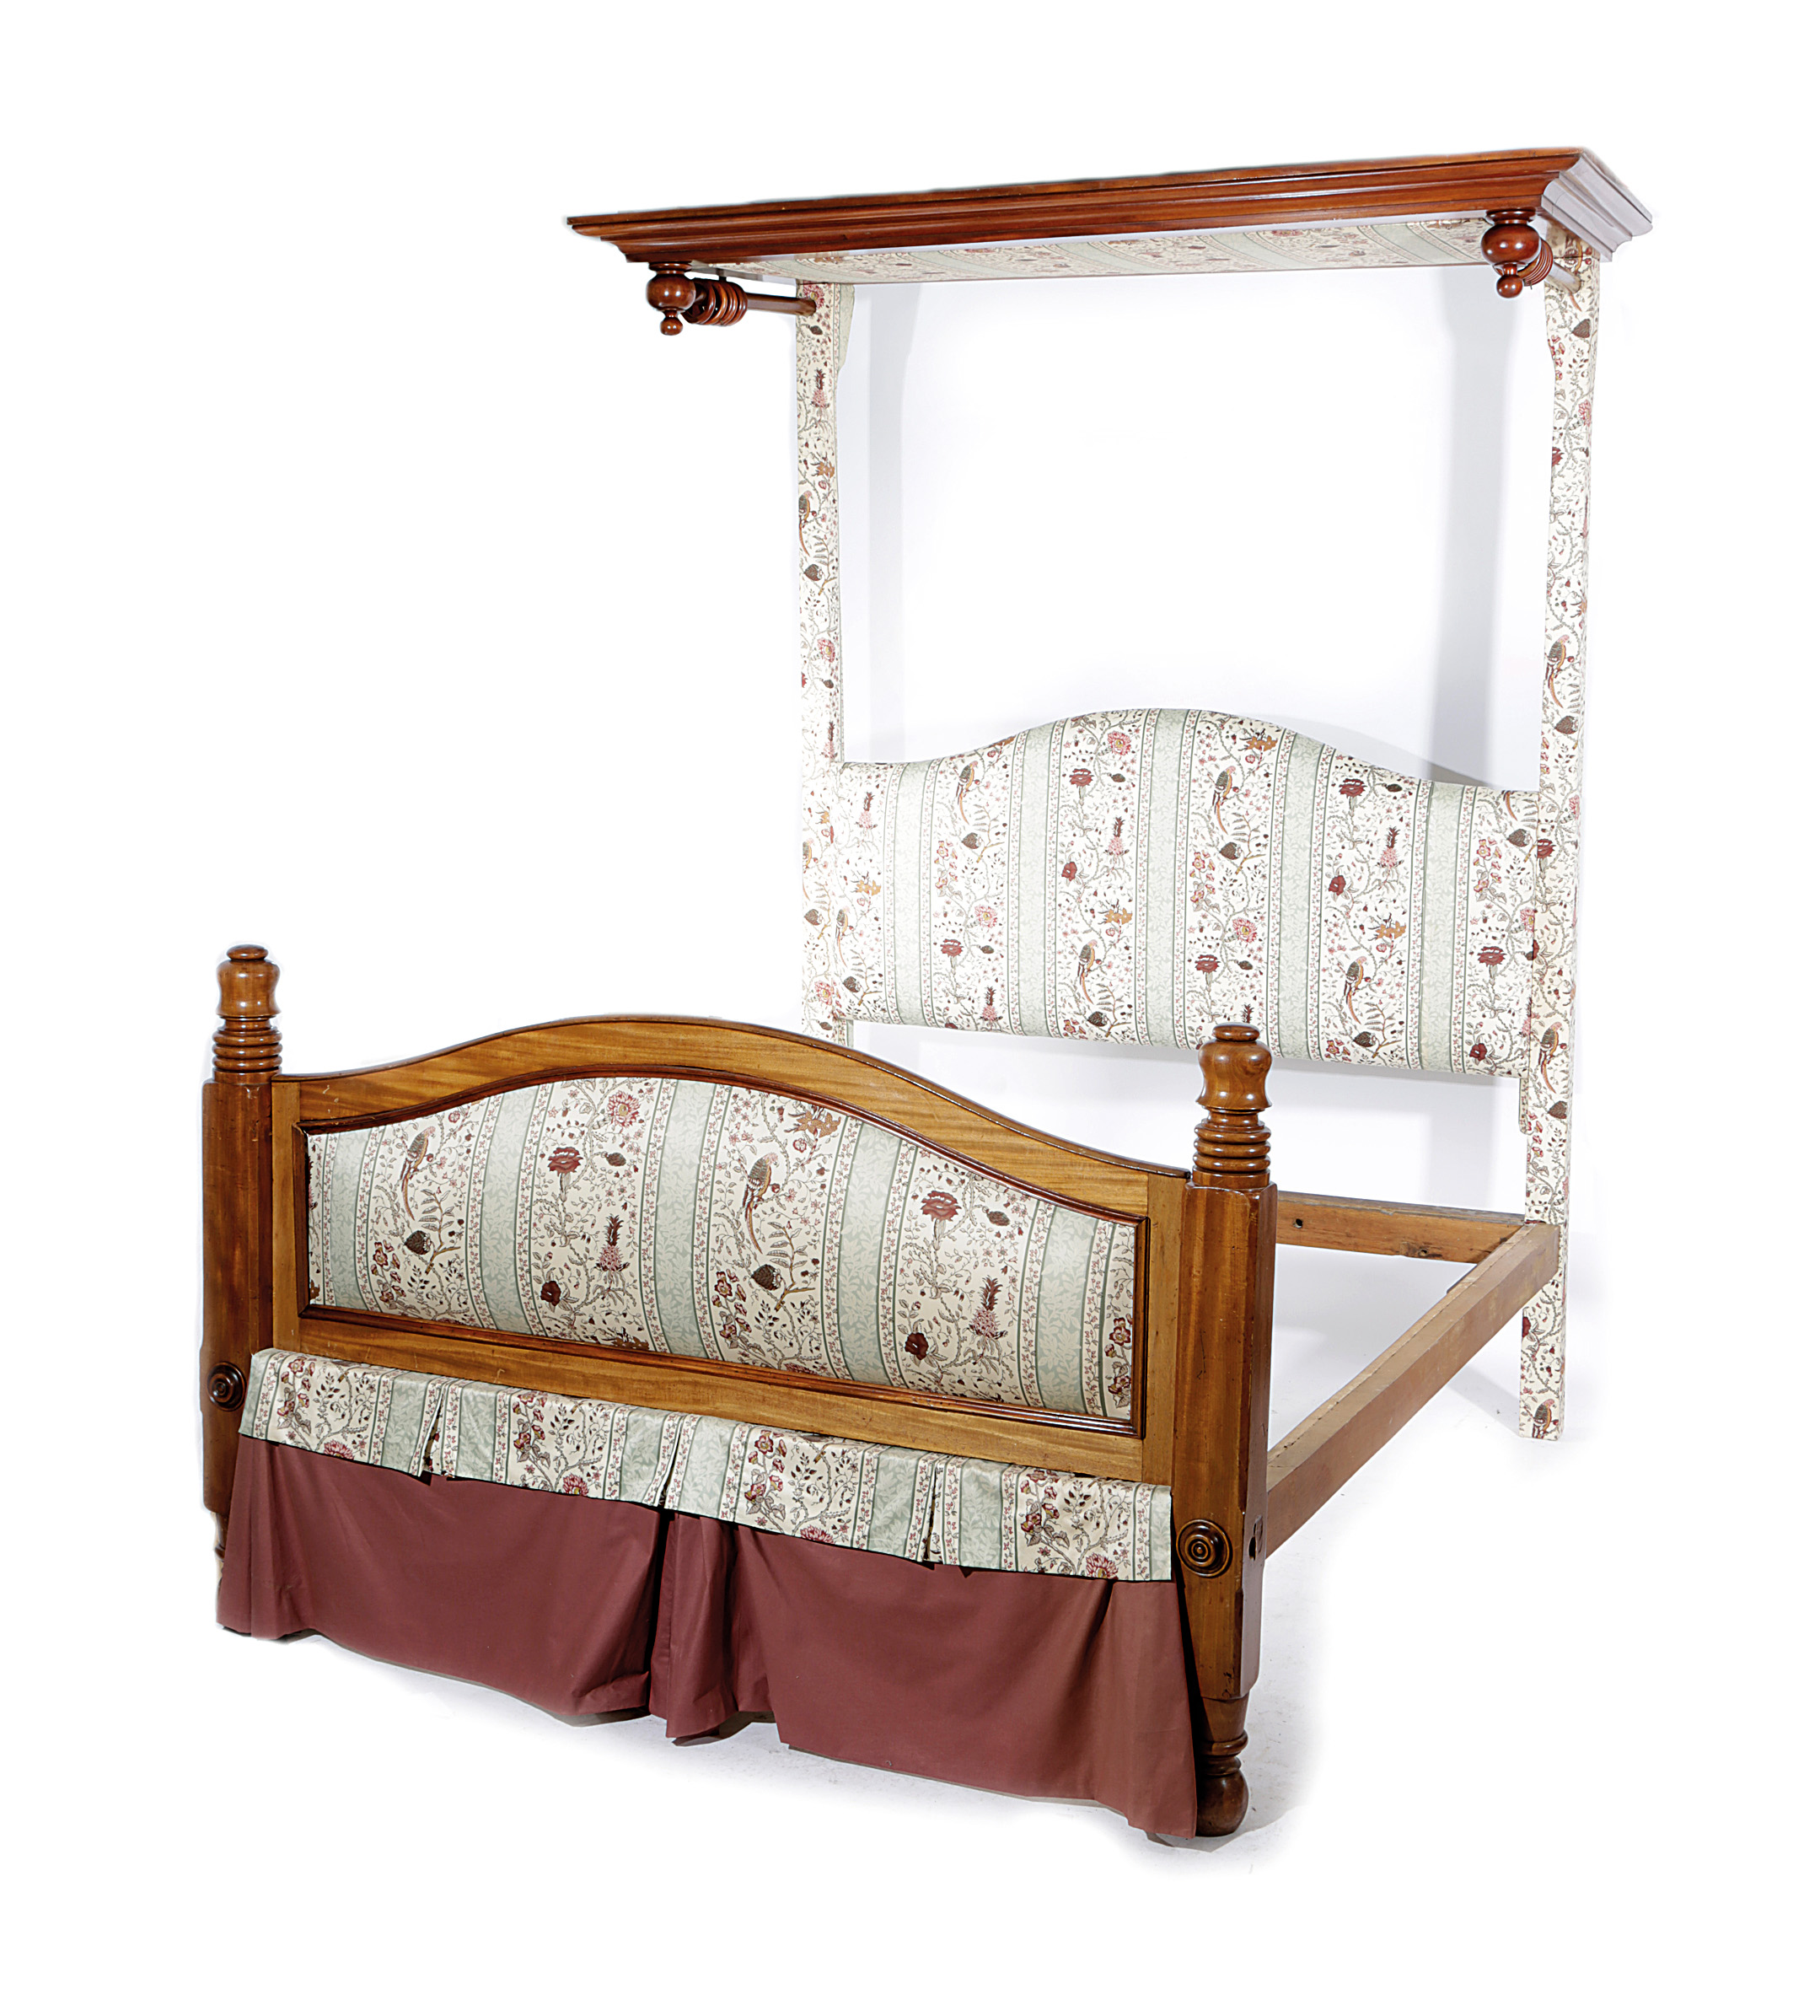 AN EARLY VICTORIAN MAHOGANY HALF-TESTER BED C.1840 AND LATER covered with later parrot and flower